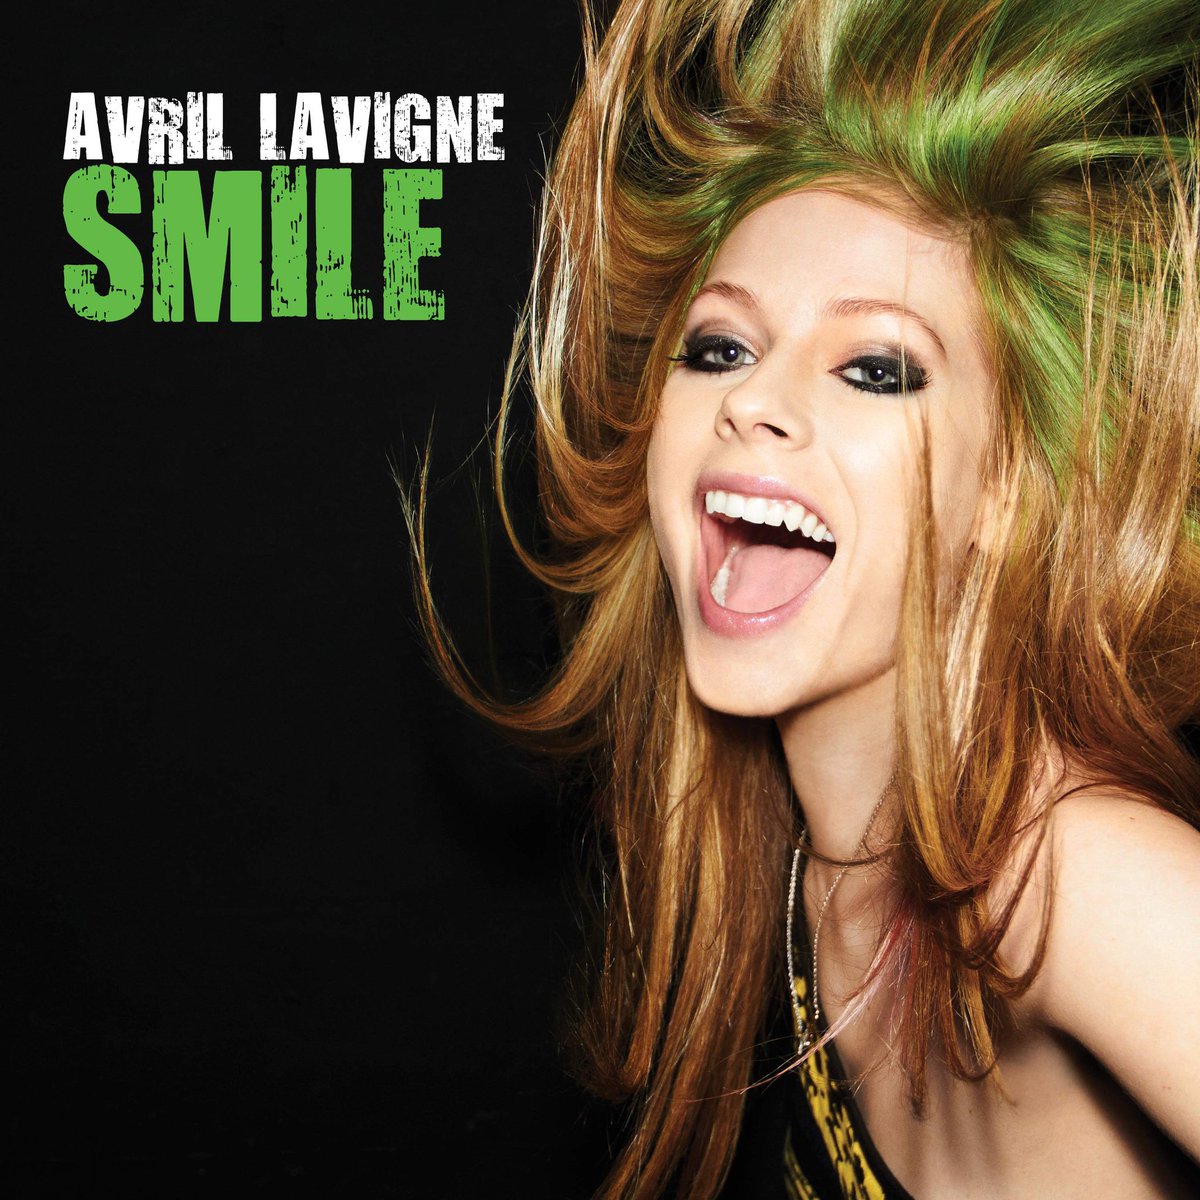 This song got me 𝙨𝙢𝙞𝙡𝙞𝙣𝙜 for 13 years already 💫 @AvrilLavigne released 'Smile' as the second single from the 'Goodbye Lullaby' album #OnThisDay in 2011